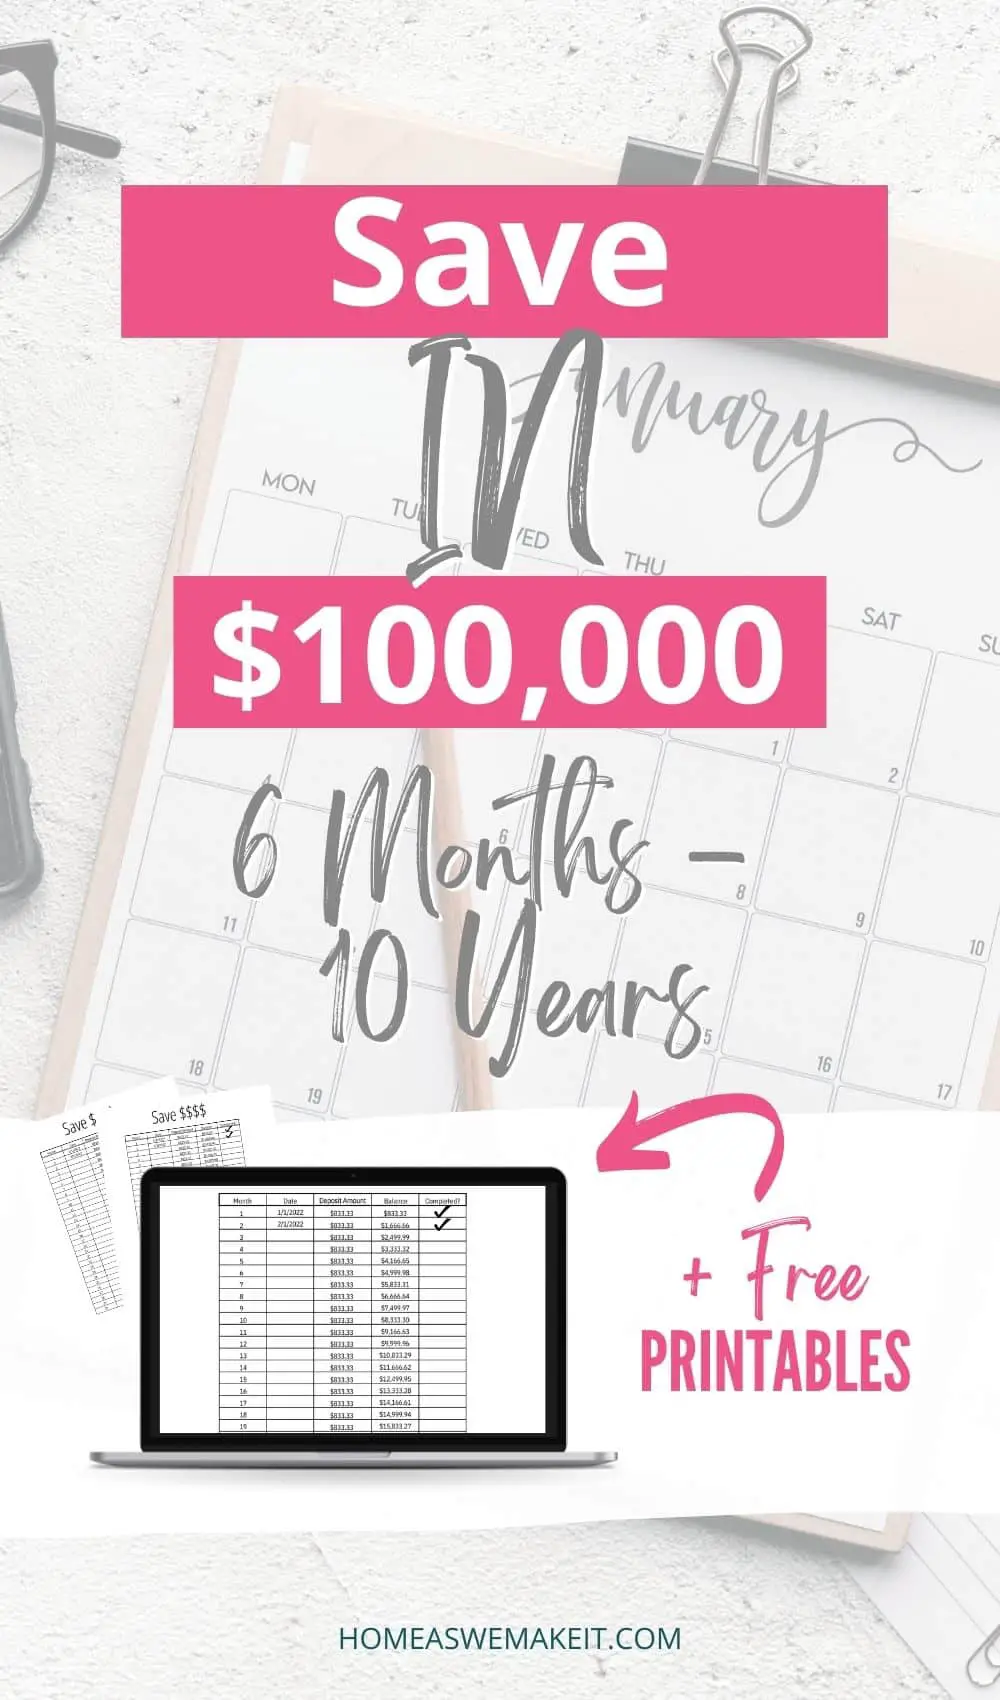 Save $100,000 in 6 months to 1 year with free printable savings trackers